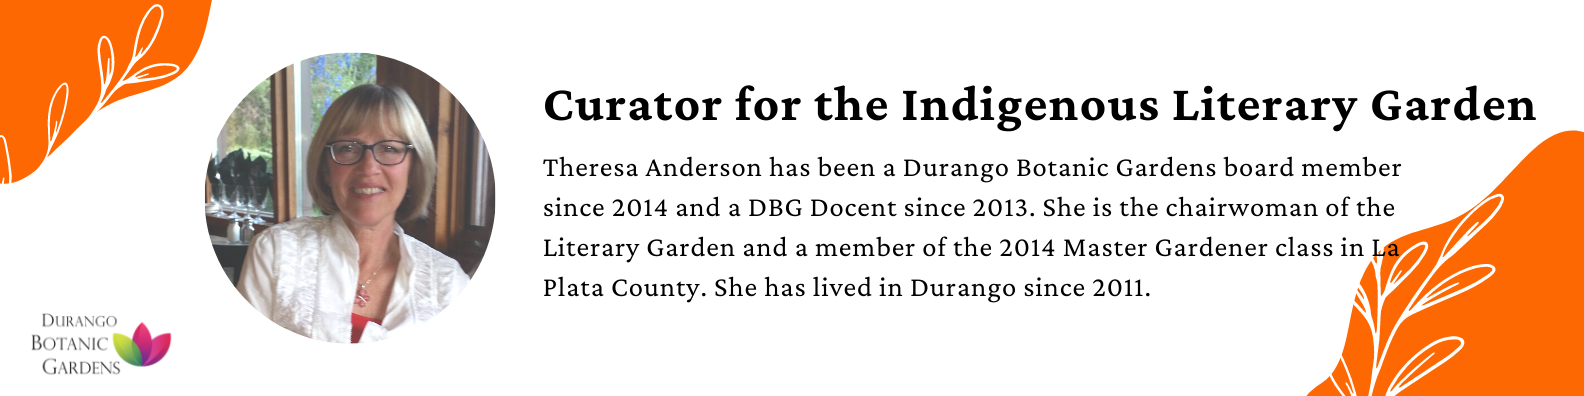 Theresa Anderson is the co-curator for the Indigenous Literary Garden